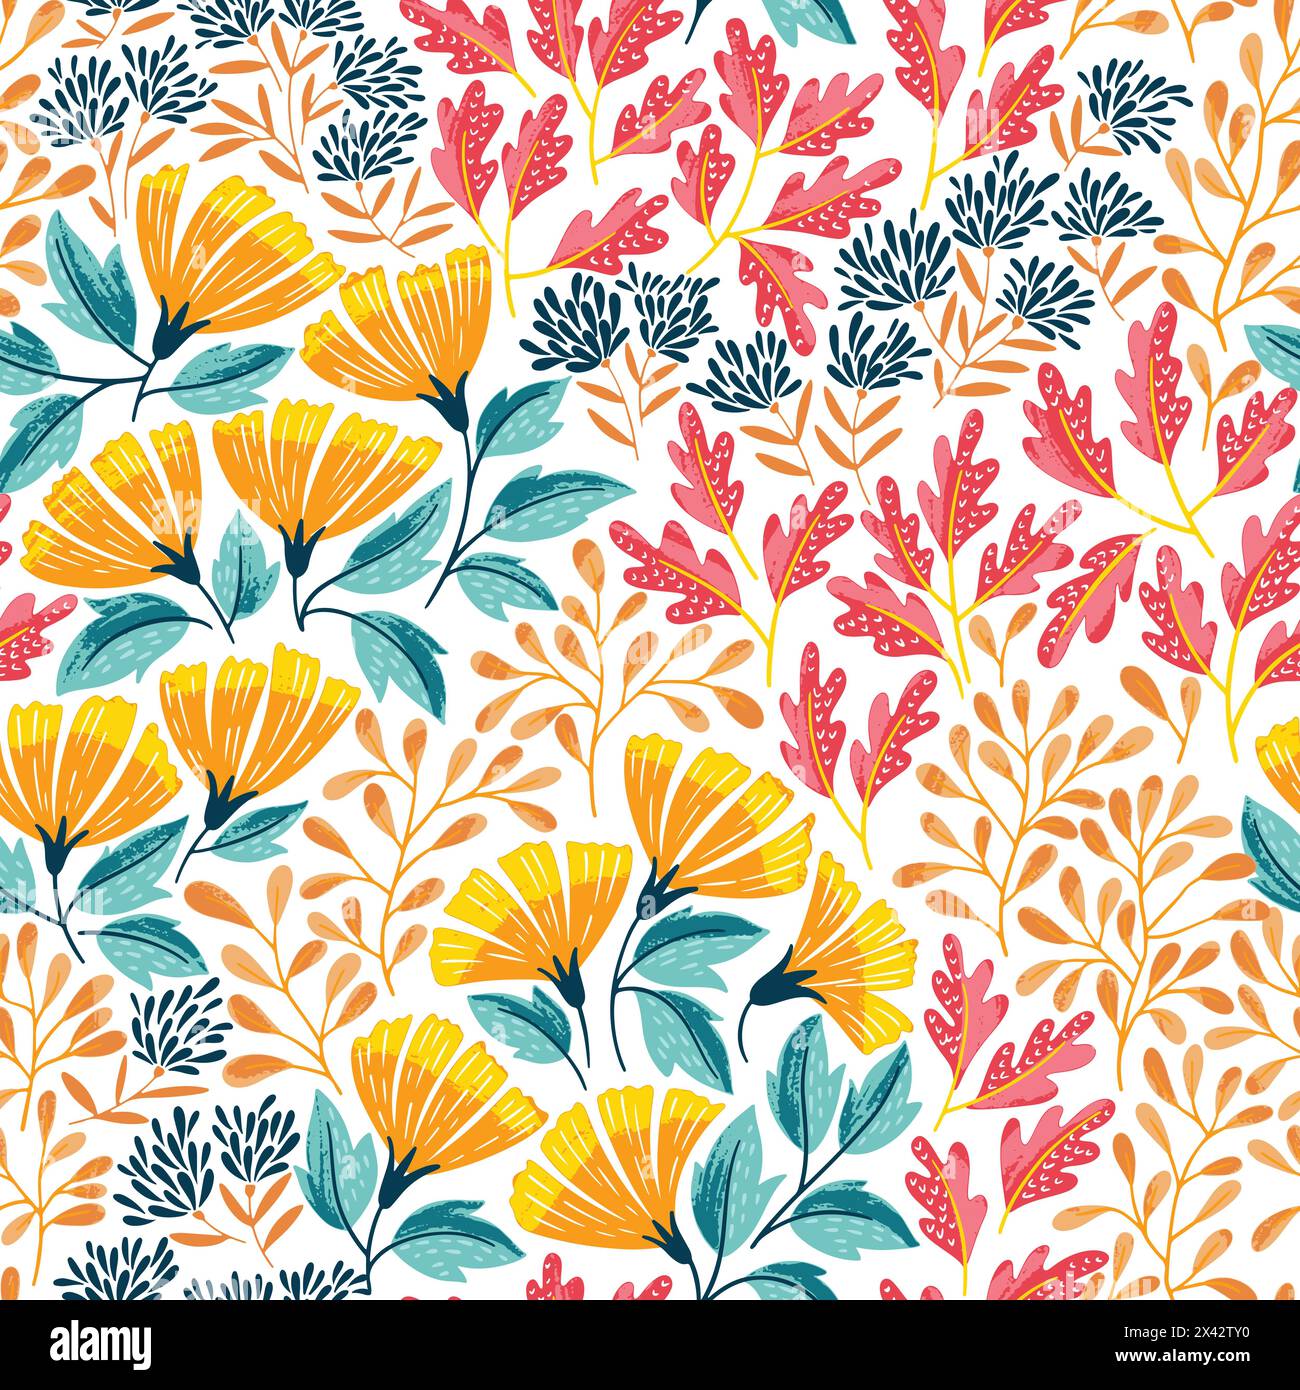 Hand drawn colorful Floral pattern. Seamless vector background. Elegant template for fashion prints. Surface with meadow flowers and herbs. Stock Vector